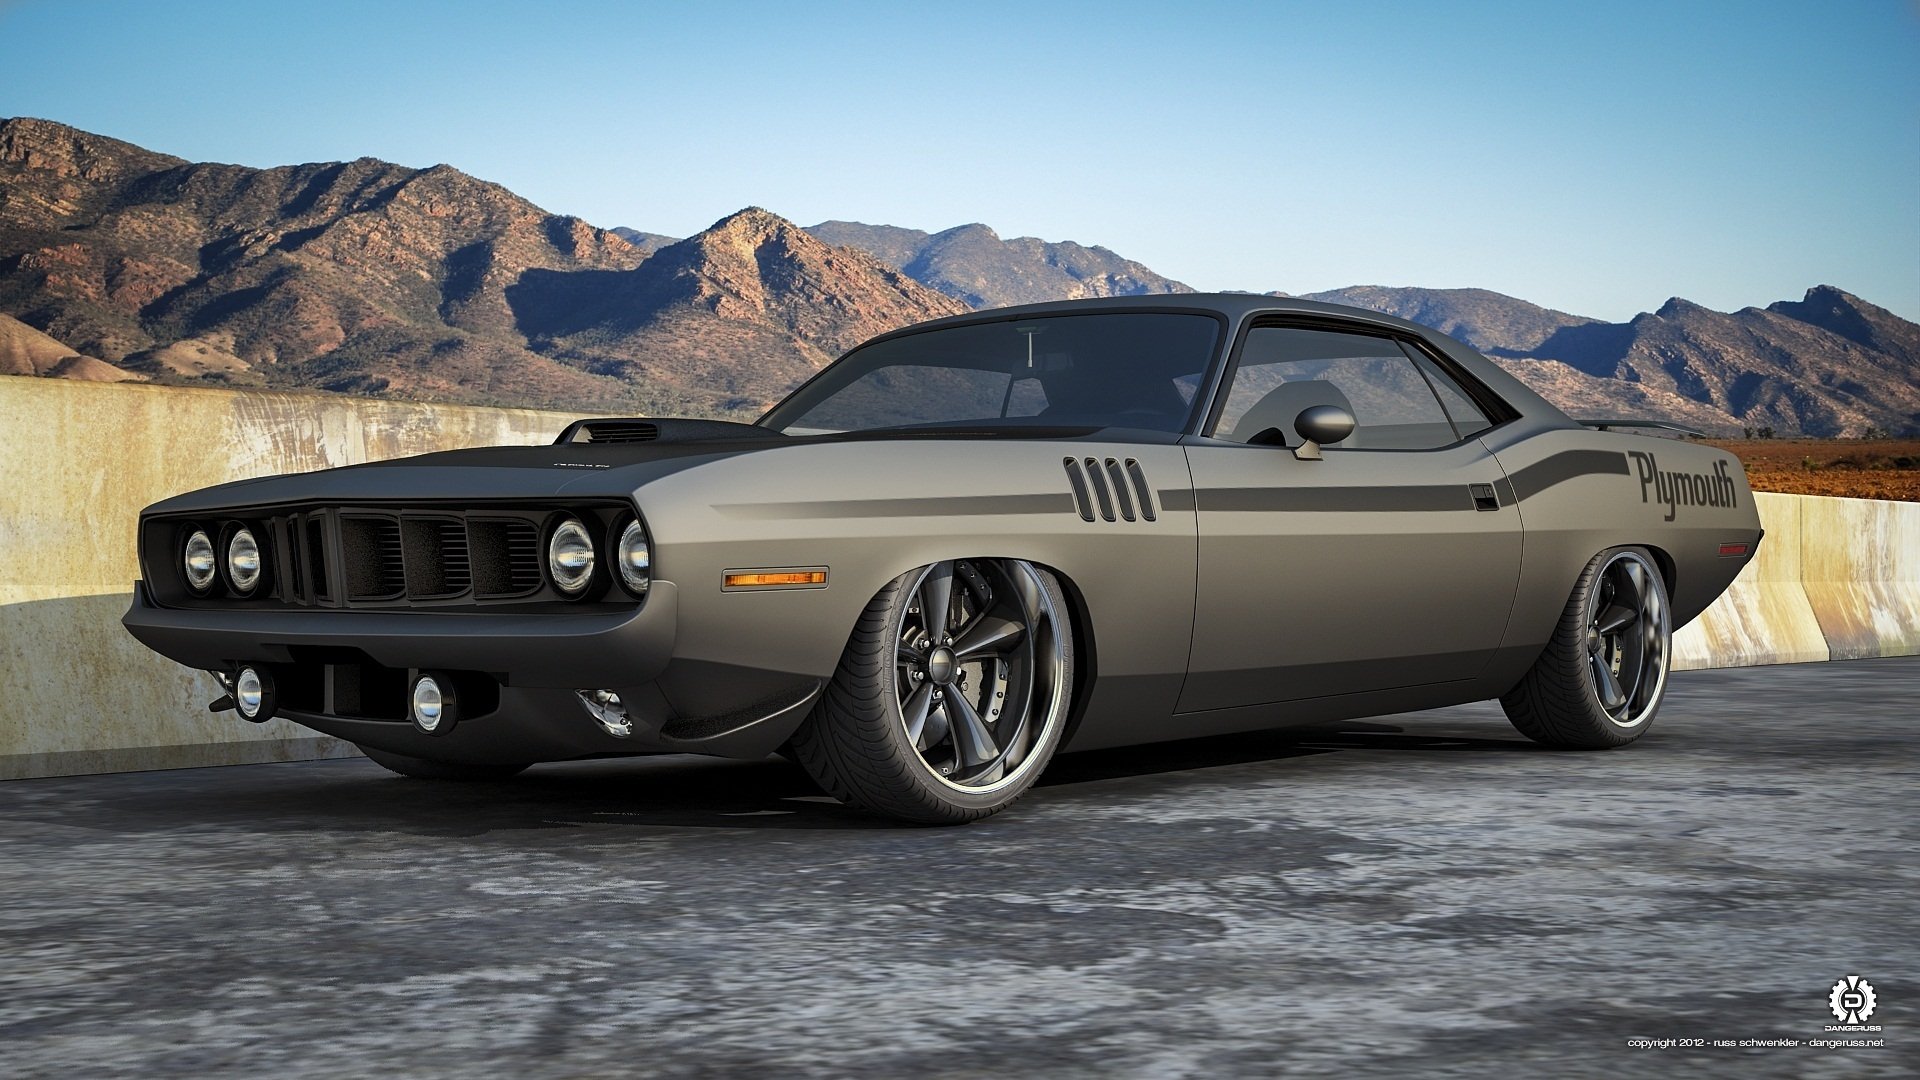 Plymouth Barracuda Full Hd Wallpaper And Background HD Wallpapers Download Free Map Images Wallpaper [wallpaper376.blogspot.com]